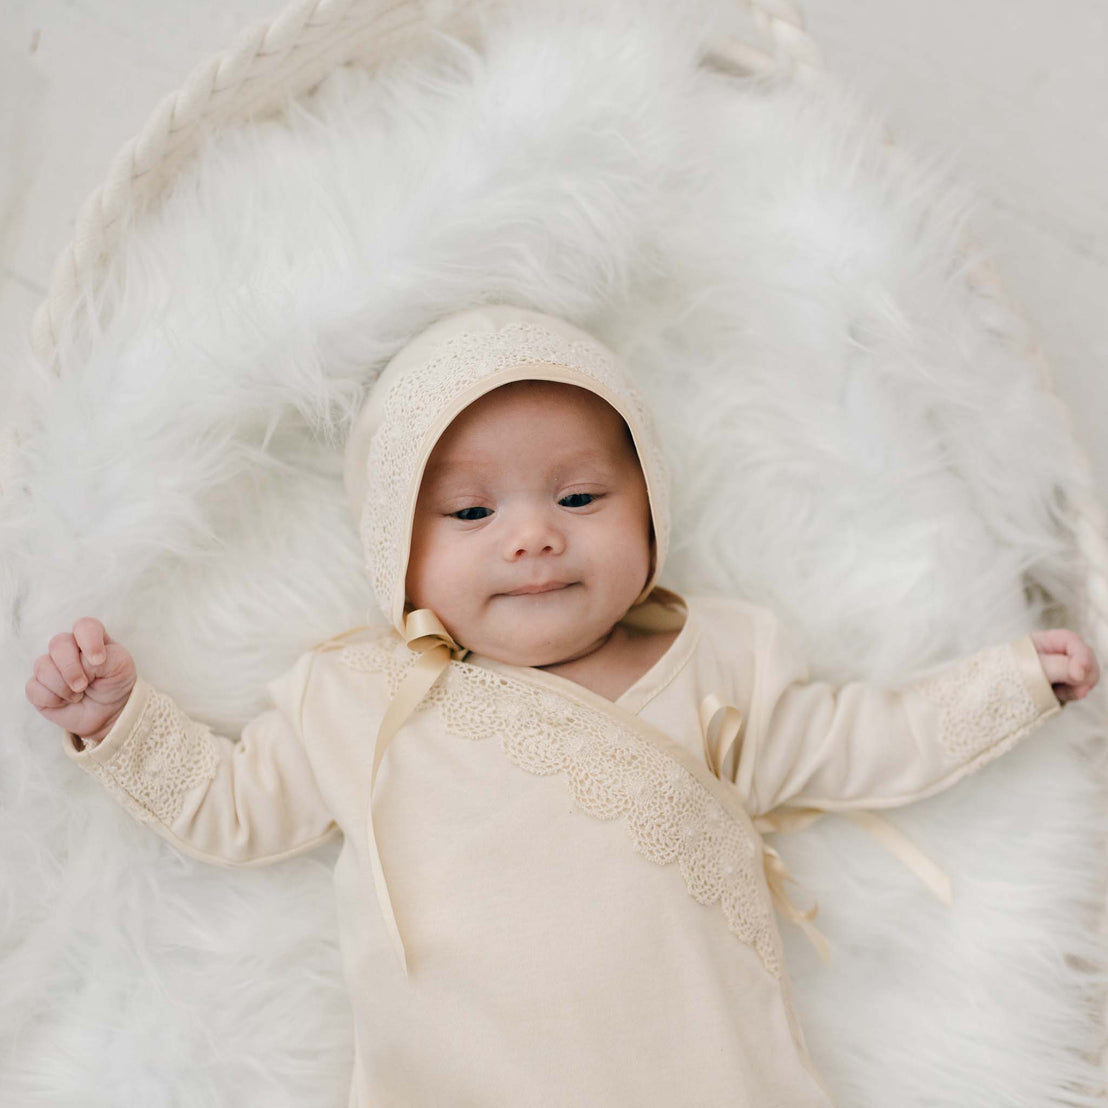 A serene newborn girl wearing the Mia Knot Gown & Bonnet lies on a white furry blanket, giving a gentle smile.